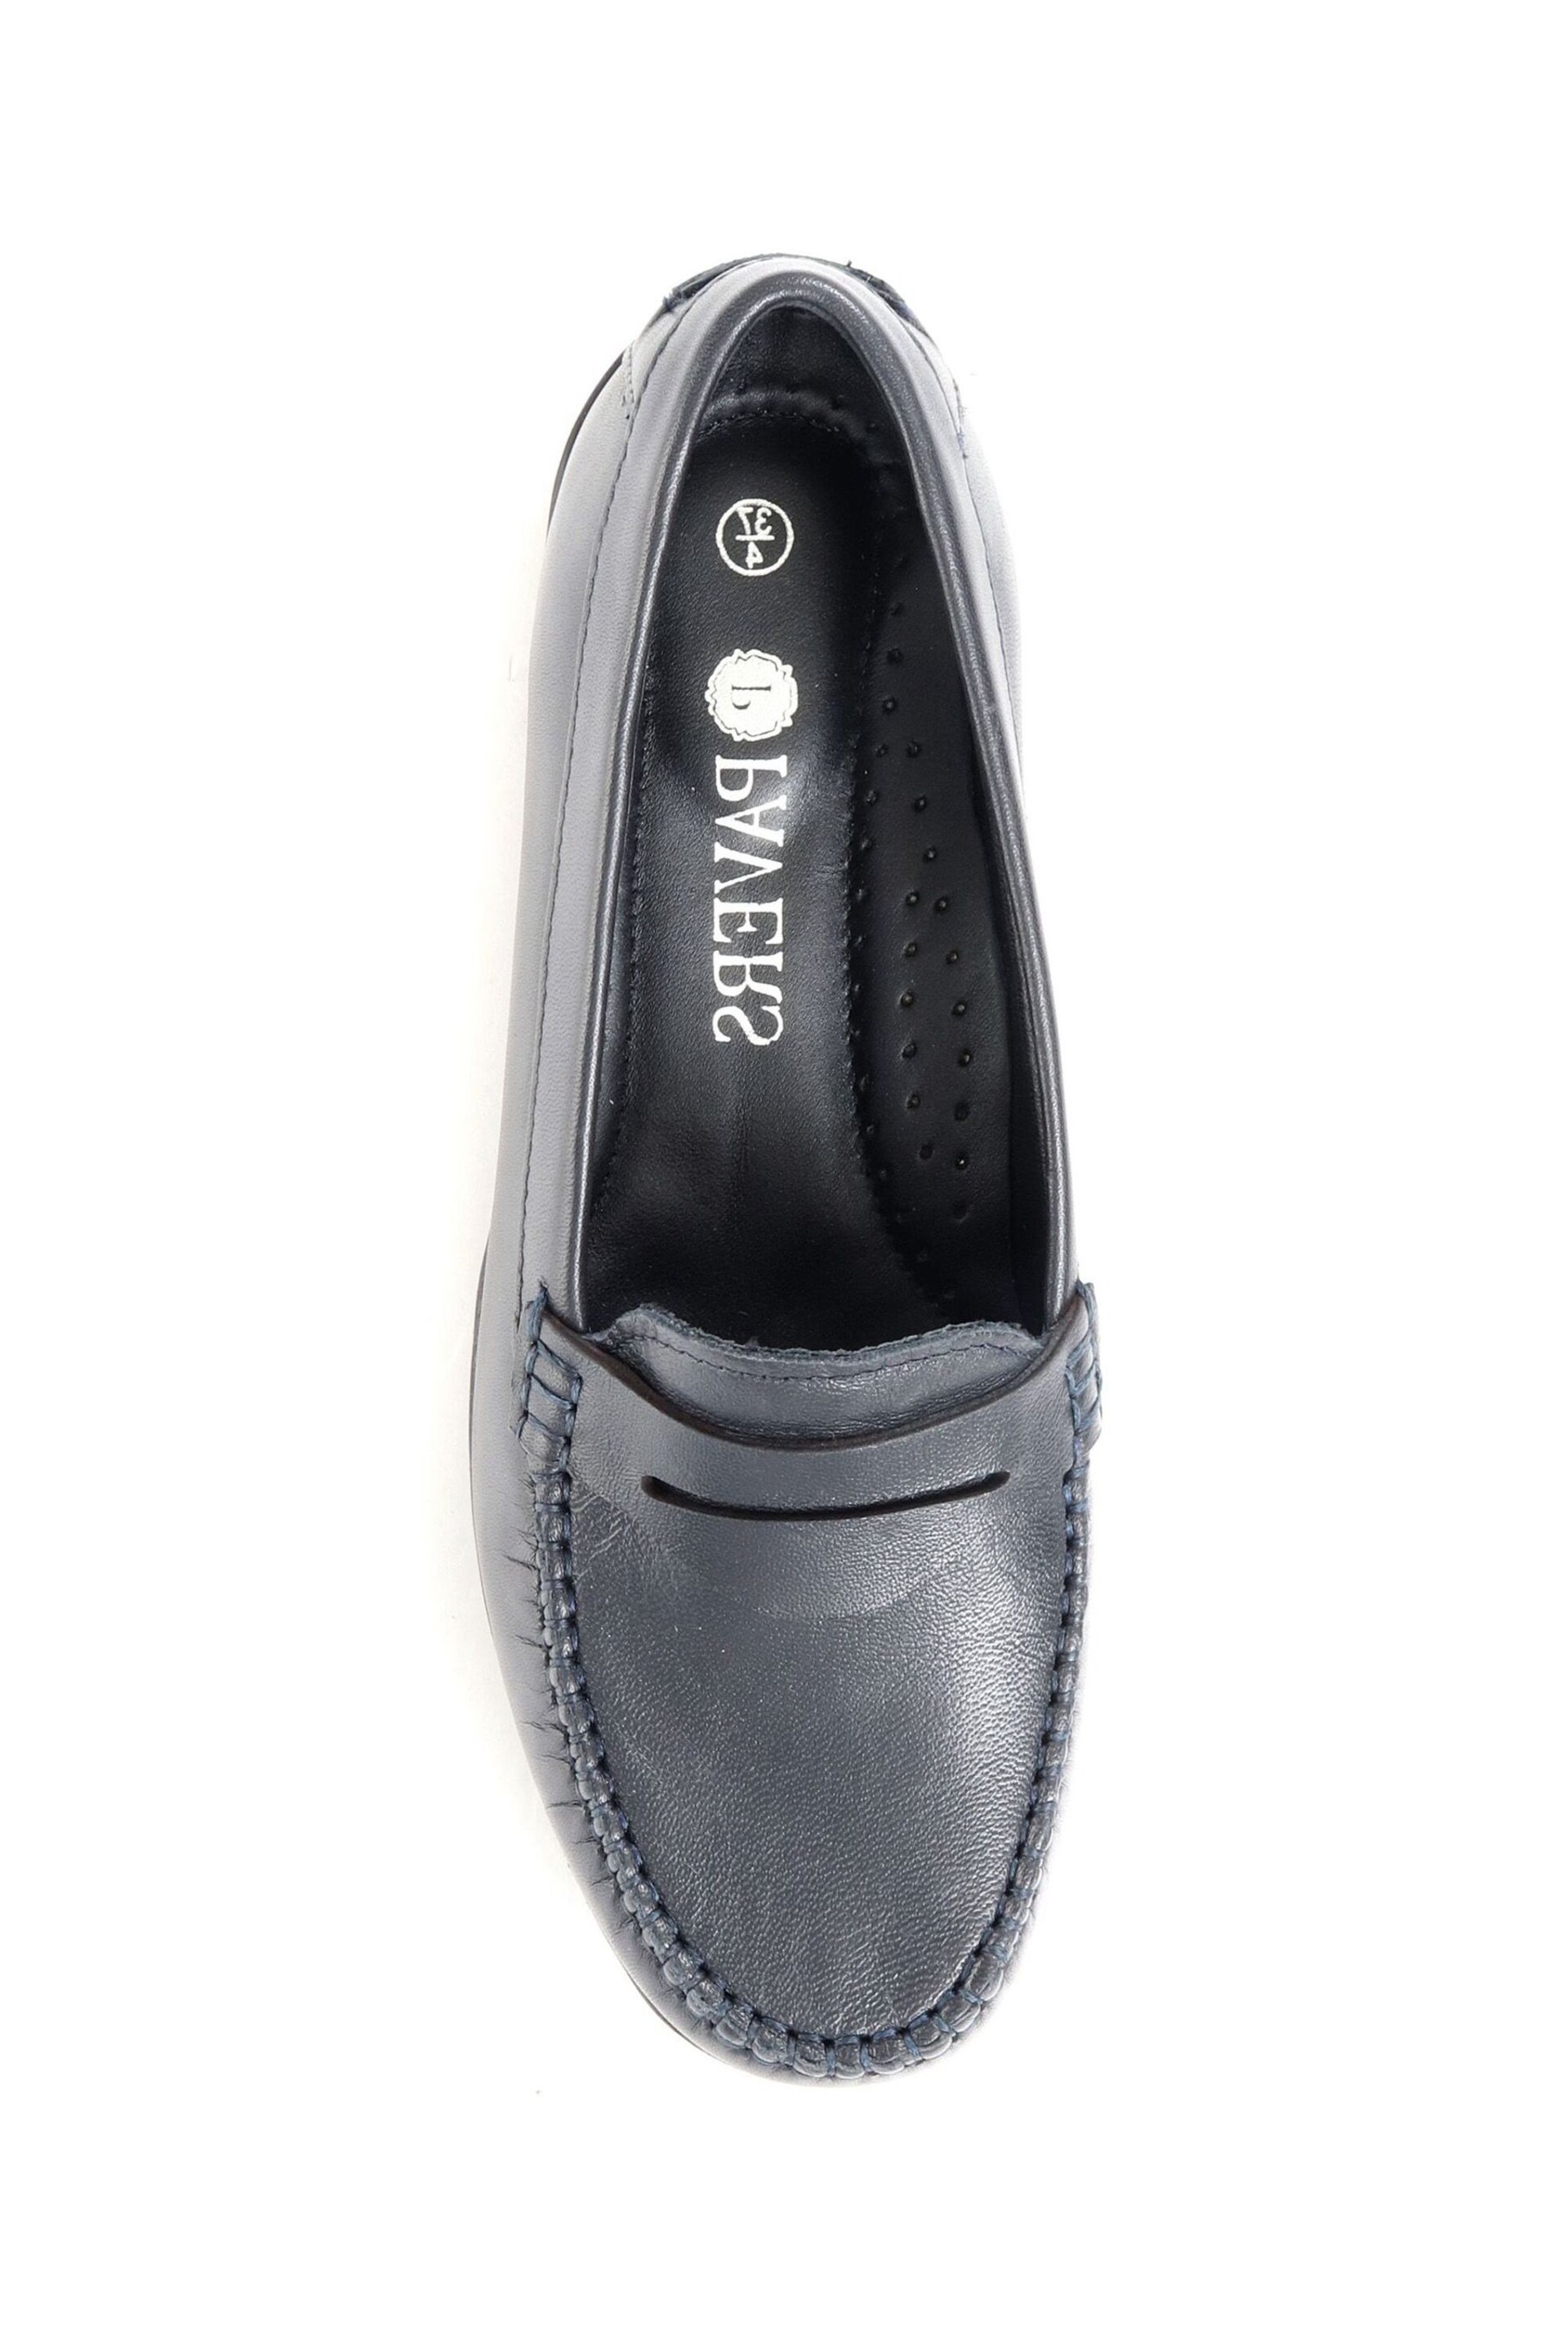 Pavers Blue Wide Fit Leather Penny Loafers - Image 4 of 7